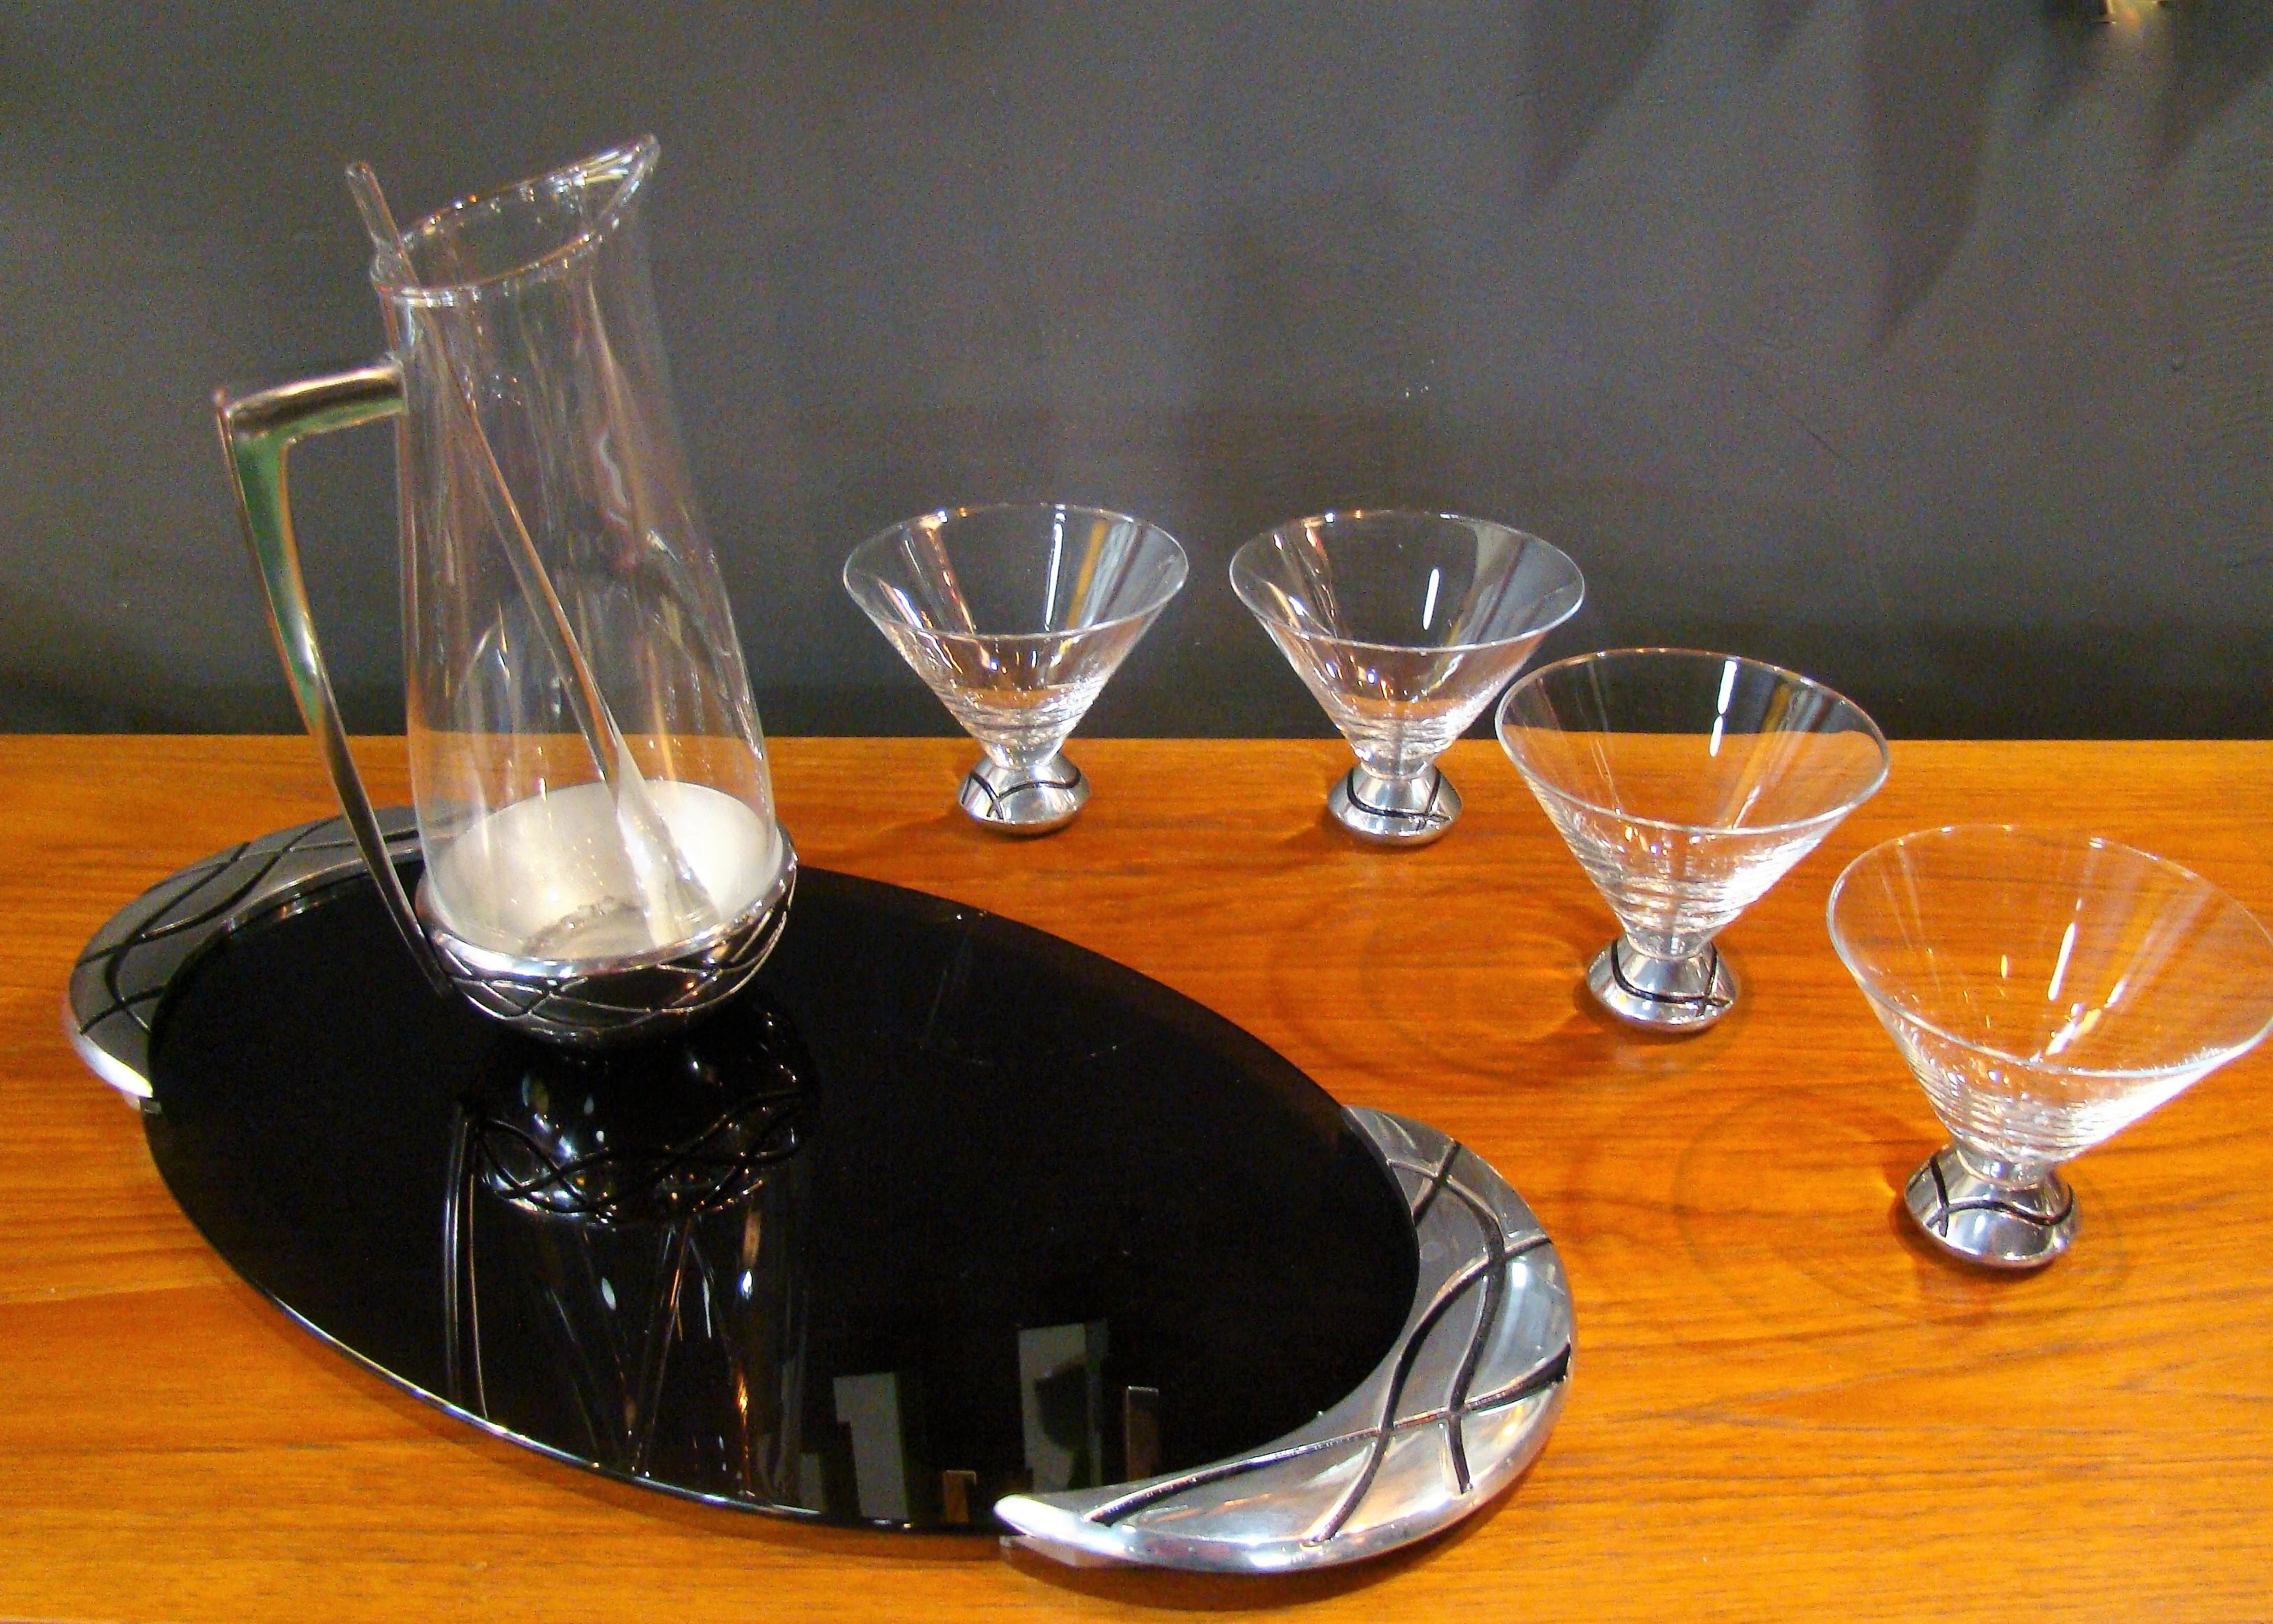 Lenox Spyro 7 Piece Martini Set: Metal accents and an irreverent design bring modern flair to your entertaining. Set includes four martini glasses, pitcher, glass stirrer and tray. Metal serveware by Lenox is made from durable tarnish free alloy,